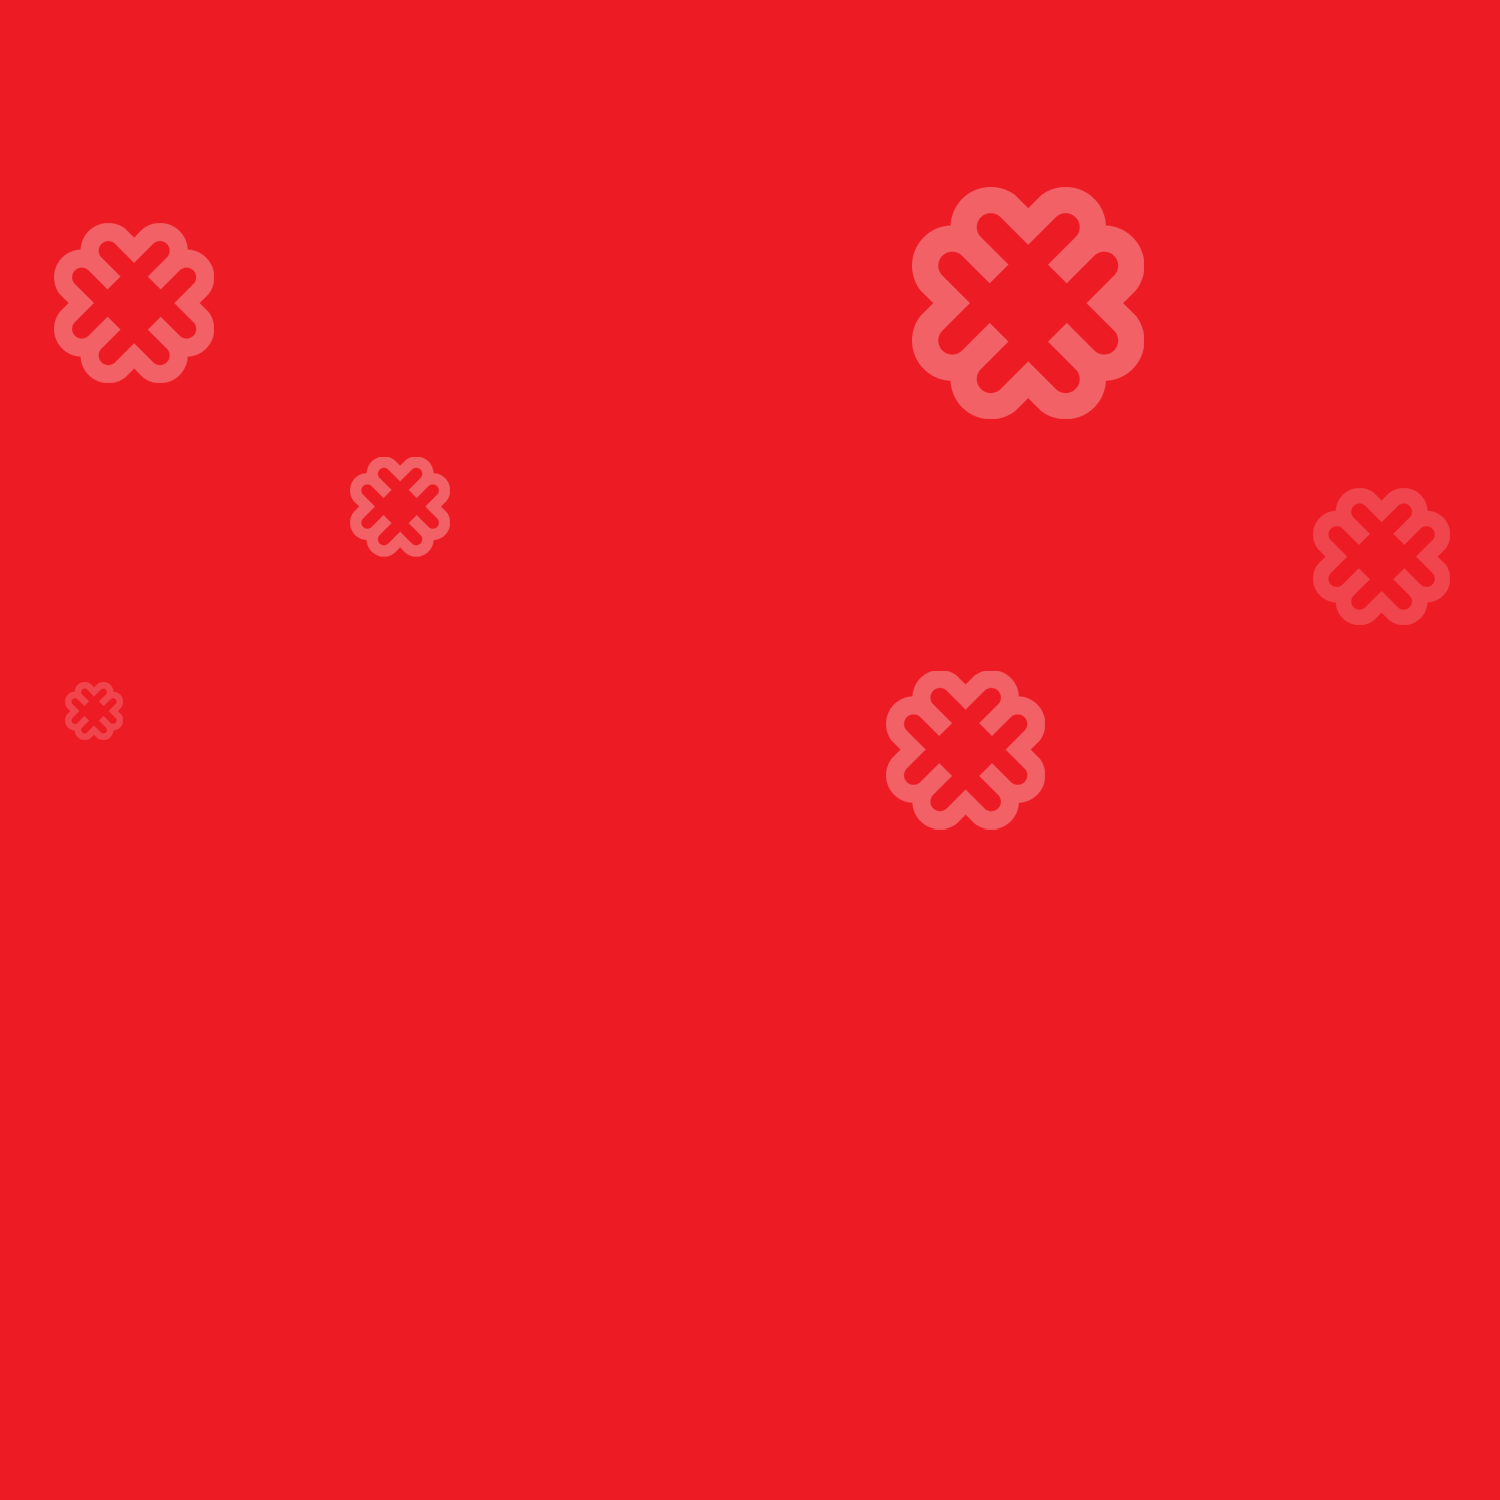 red background pattern with dazzly logo